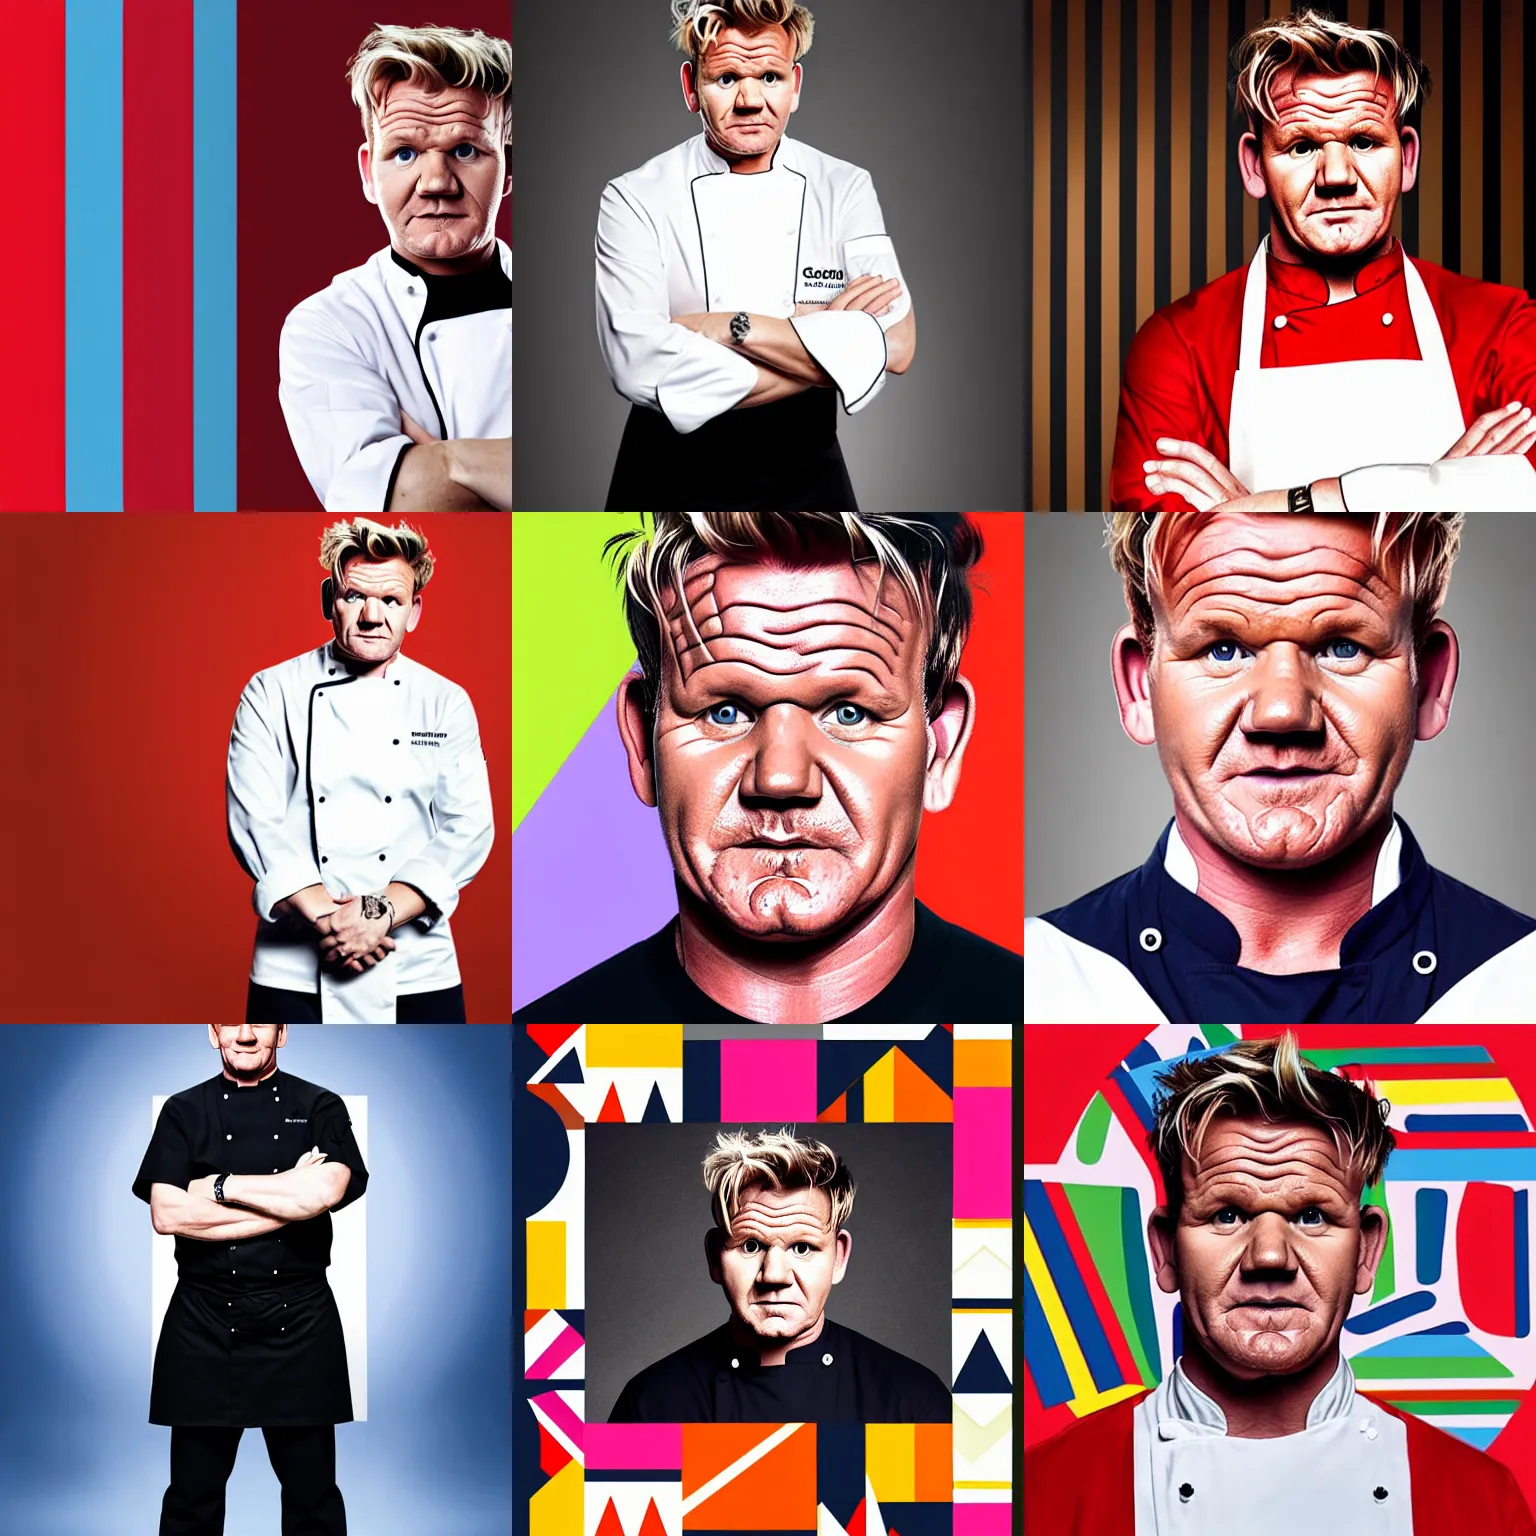 Prompt: A portrait of Gordon Ramsay wearing a chef uniform, geometric shapes, candy colors, rounded corners